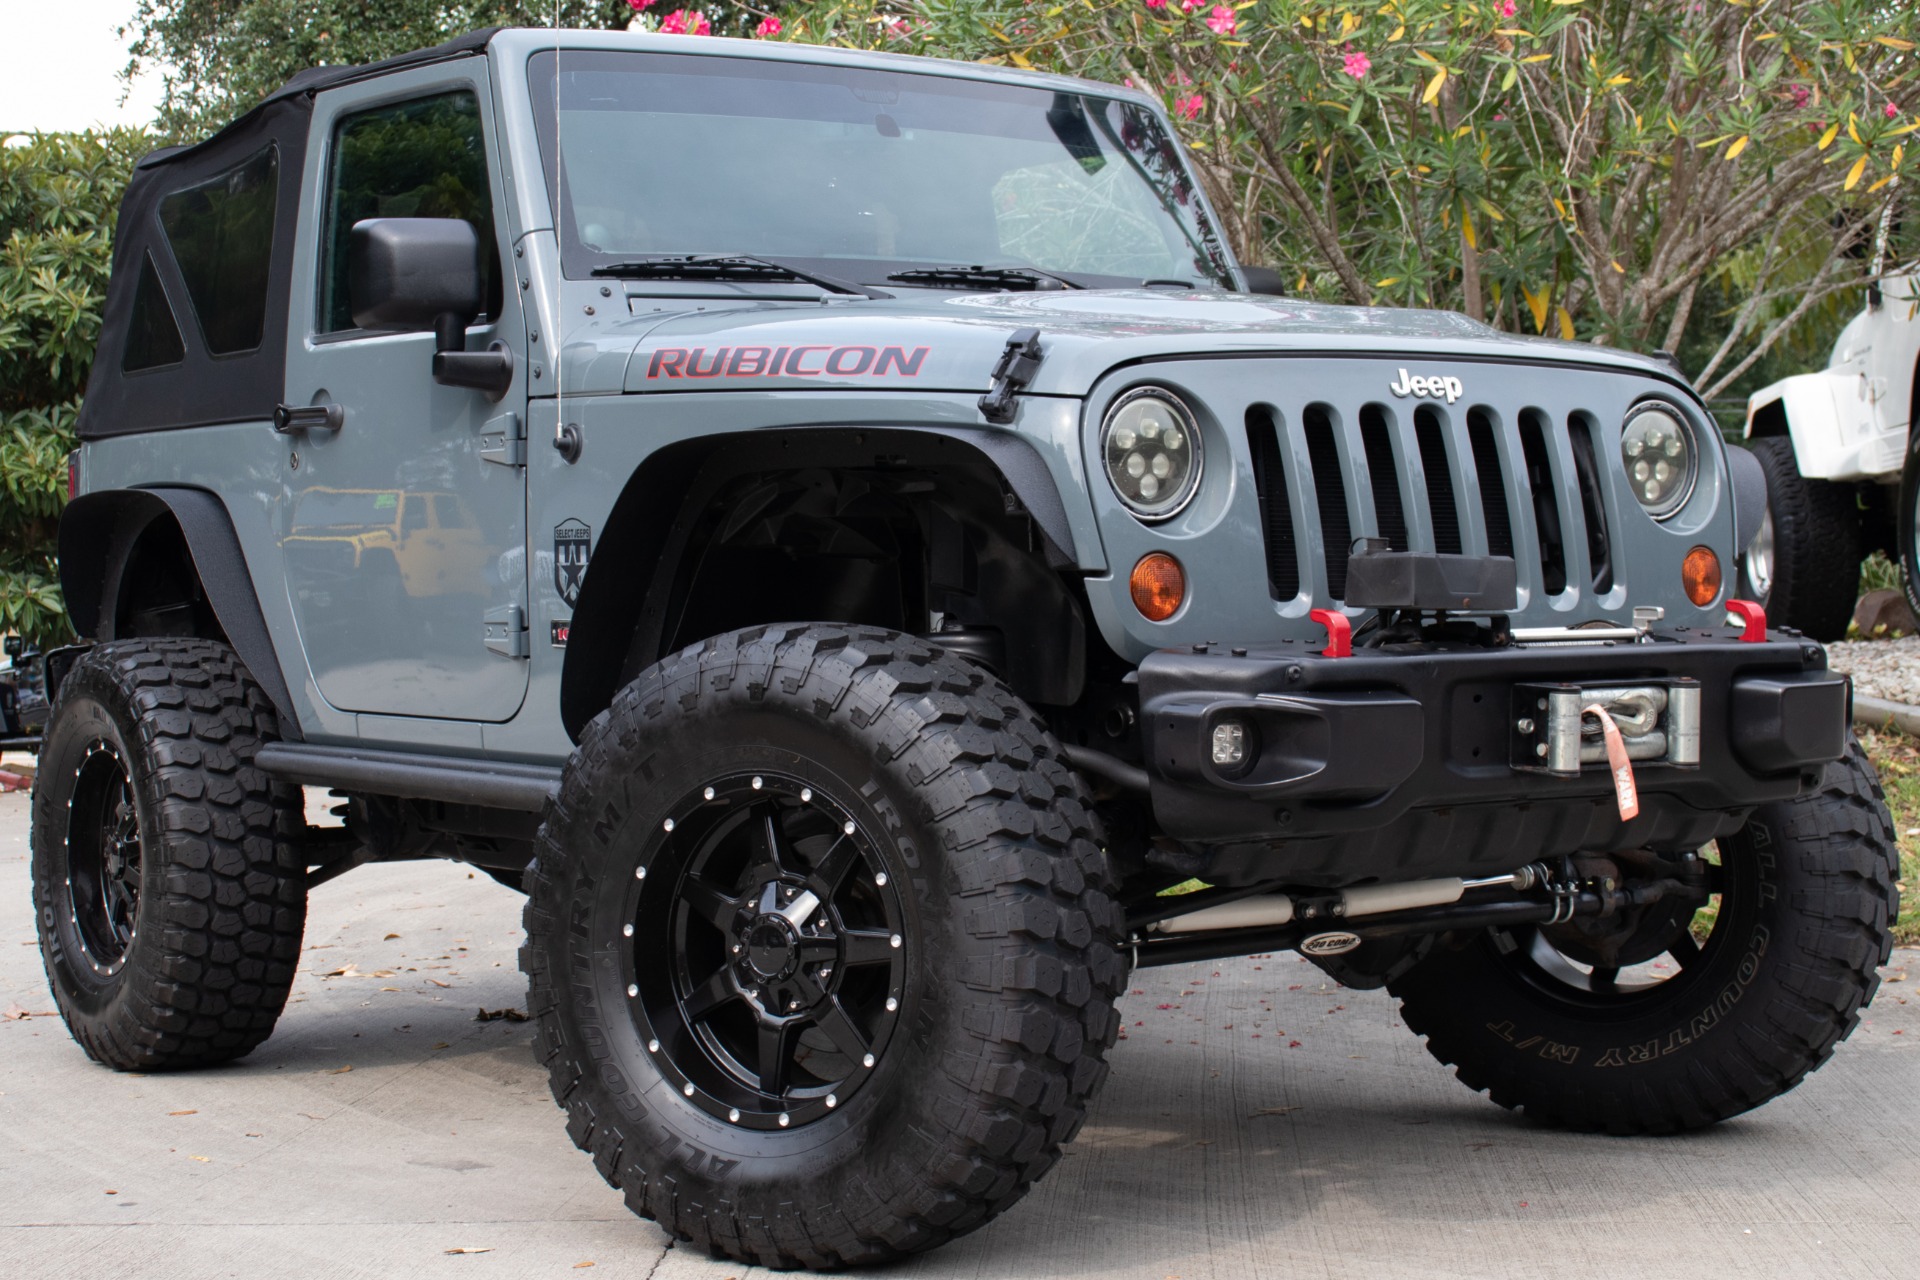 Used 2013 Jeep Wrangler Rubicon 10th Anniversary For Sale ($26,995) |  Select Jeeps Inc. Stock #651213